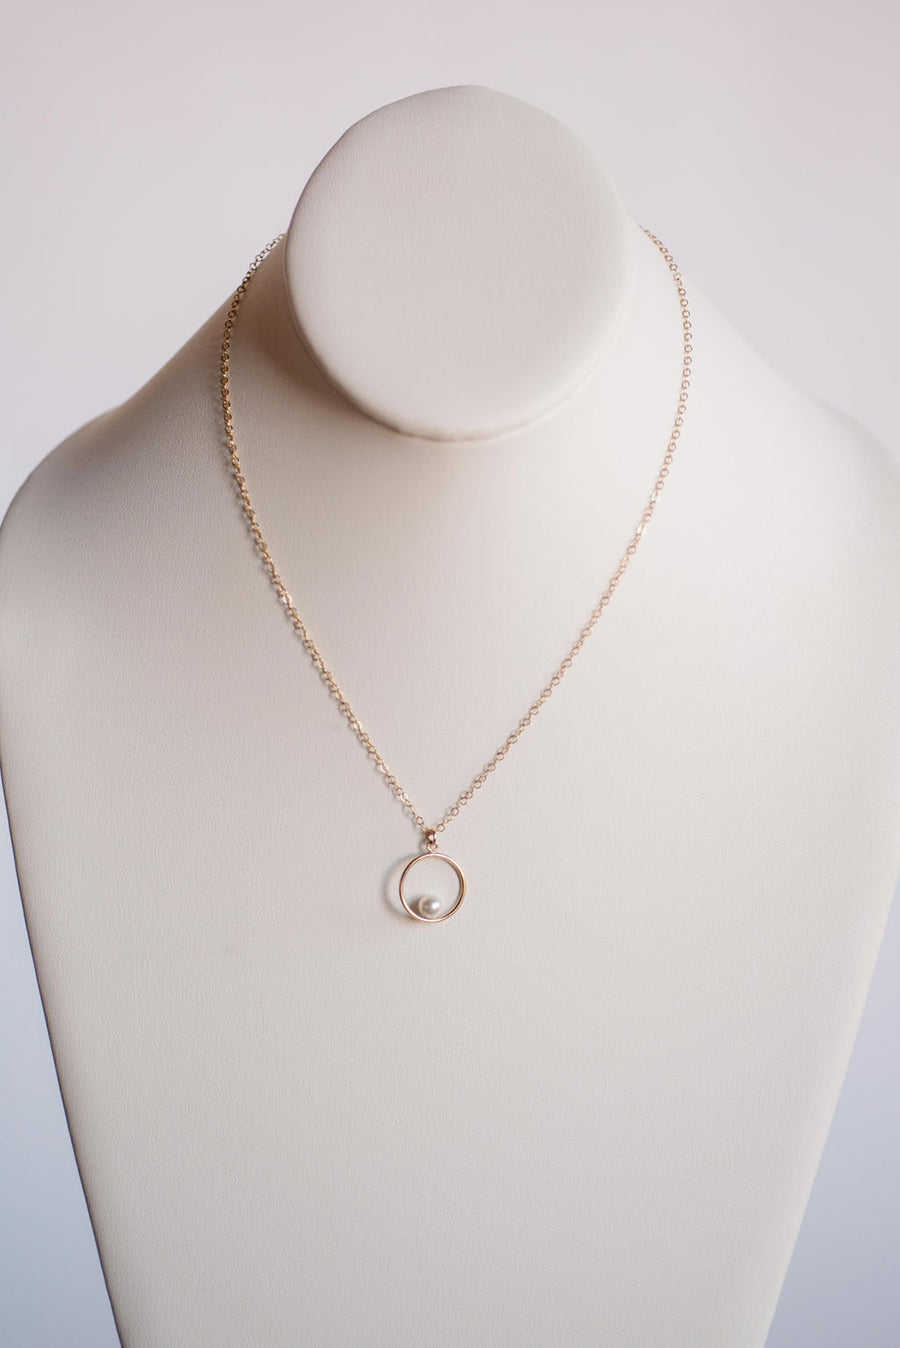 Circle + Pearl Pendant, Pearl Necklace, Handmade Jewelry, 14k Gold, Circle, Pearl, Christmas Gift, Mother&#39;s Day Gifts, Wedding, Bridesmaid